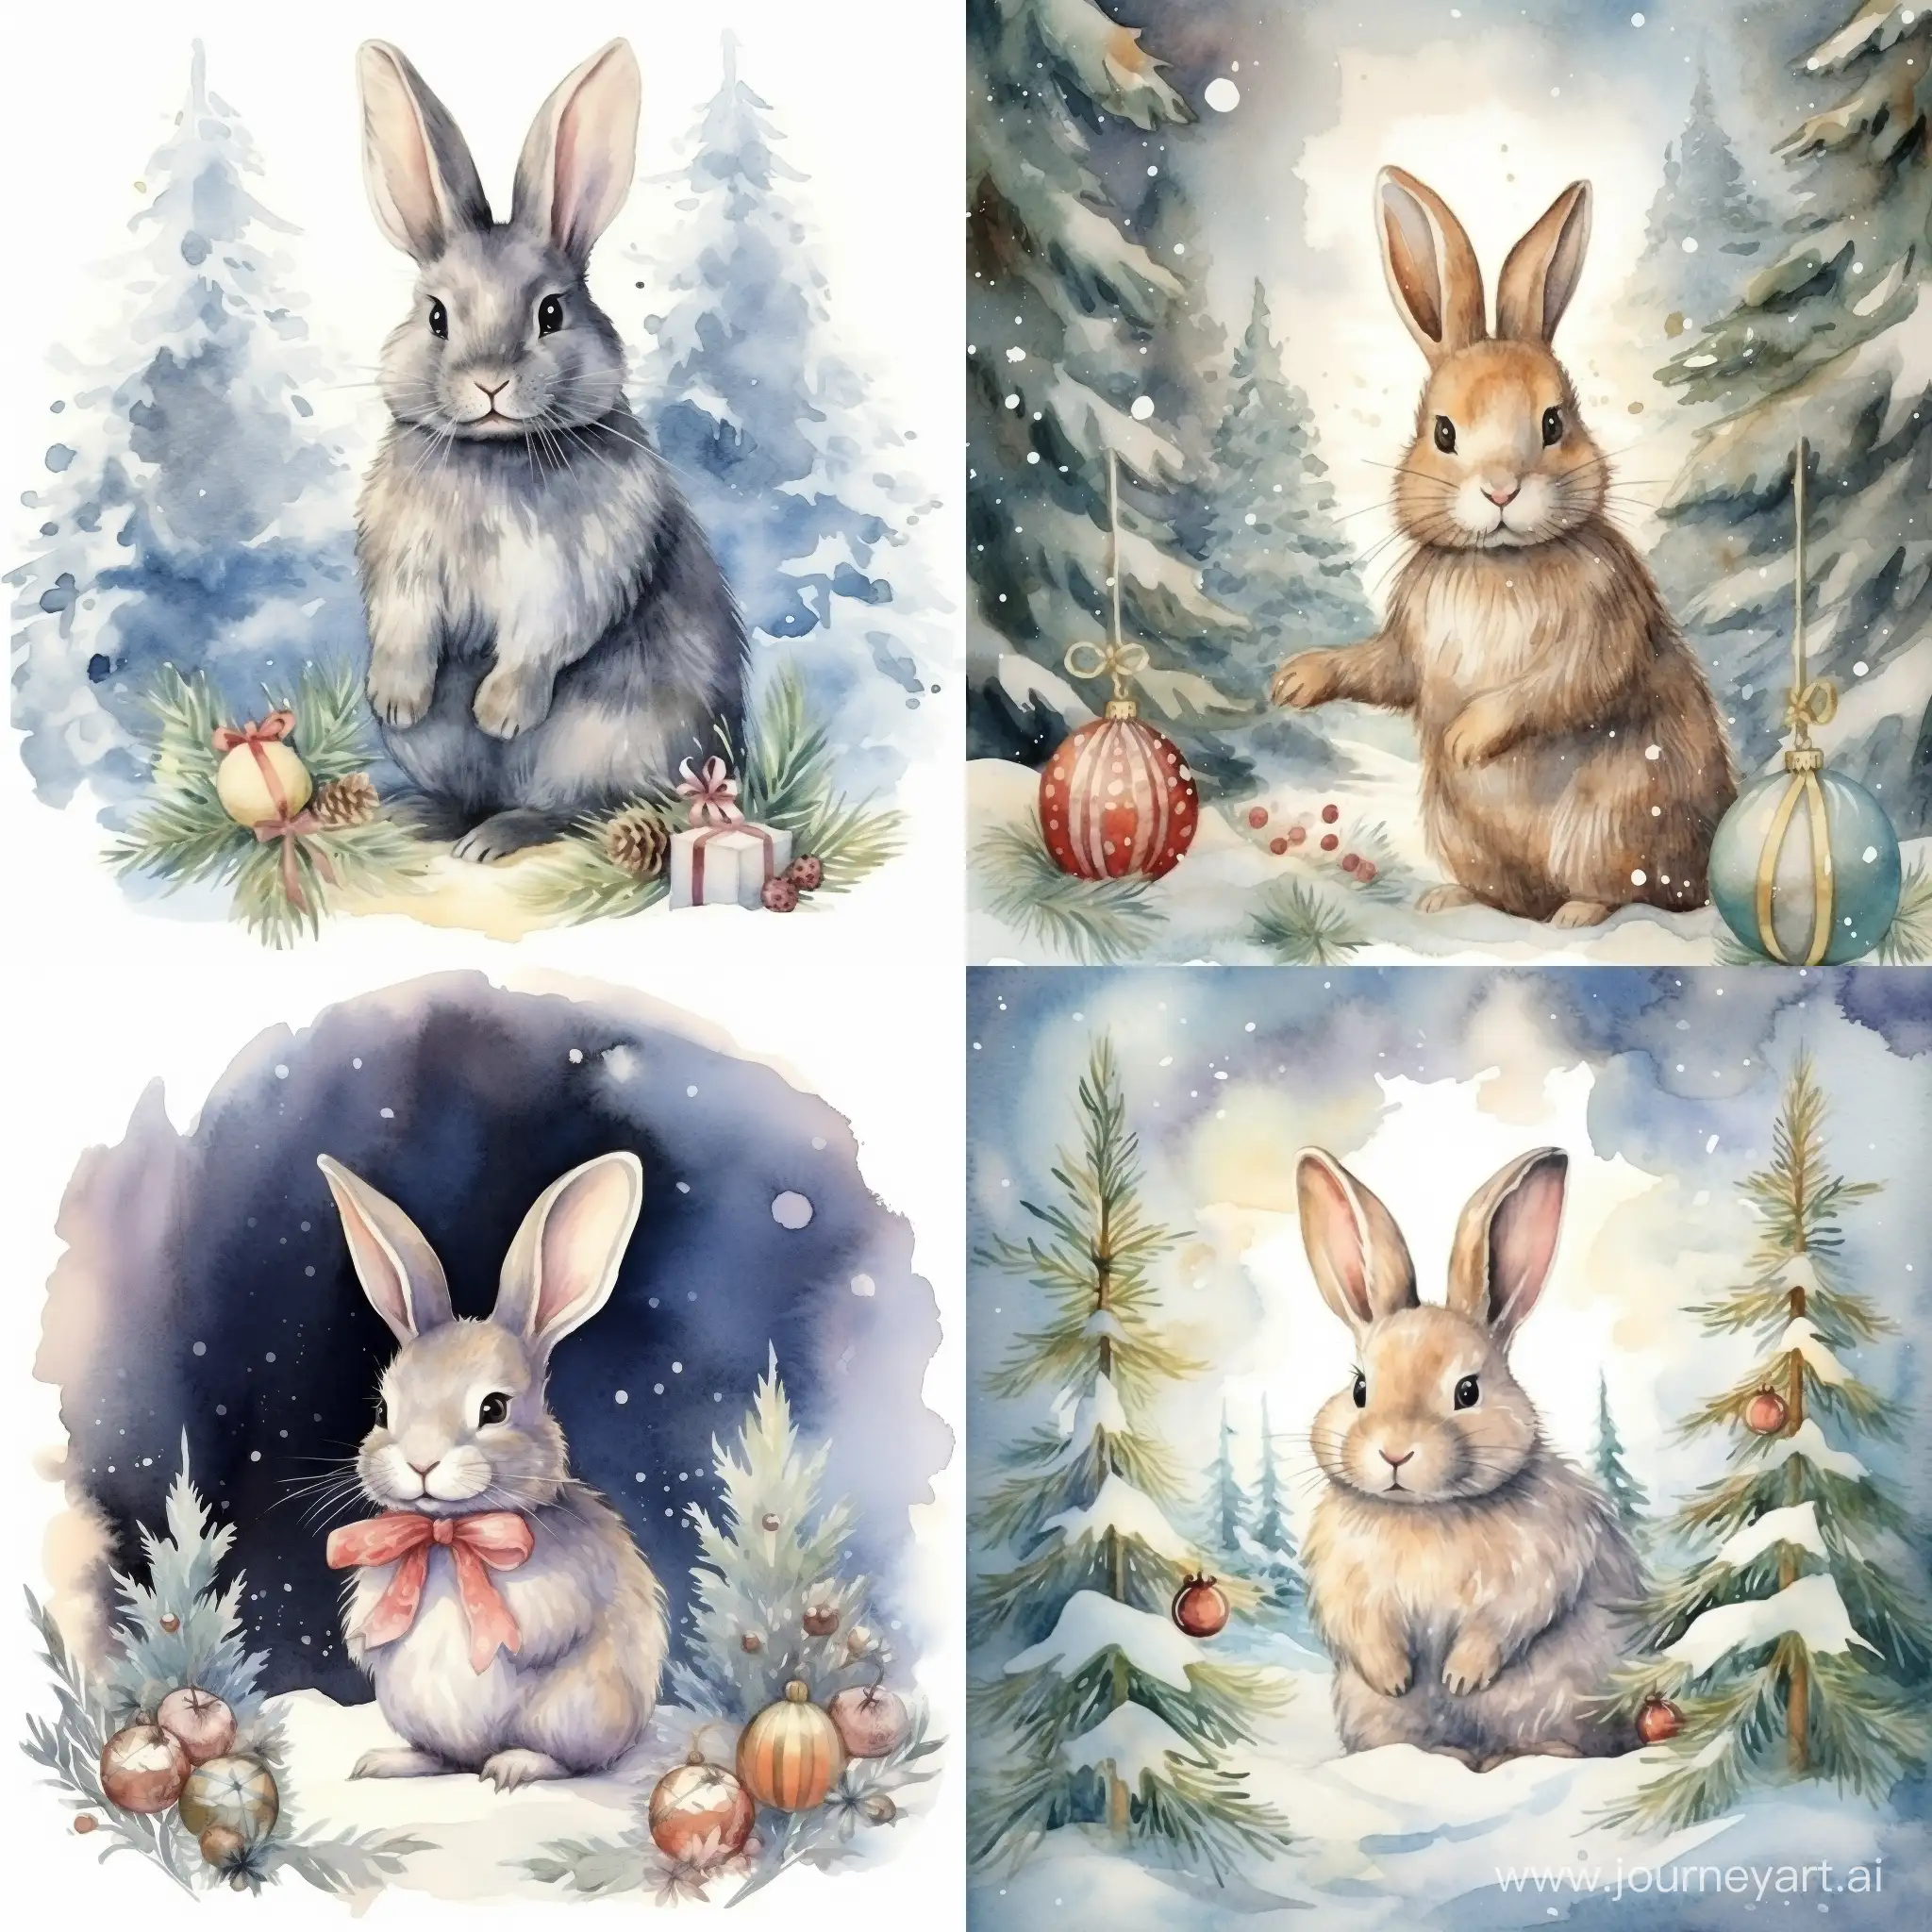 Enchanting-Winter-Scene-Bunny-in-Antique-Attire-Decorating-a-Forest-Christmas-Tree